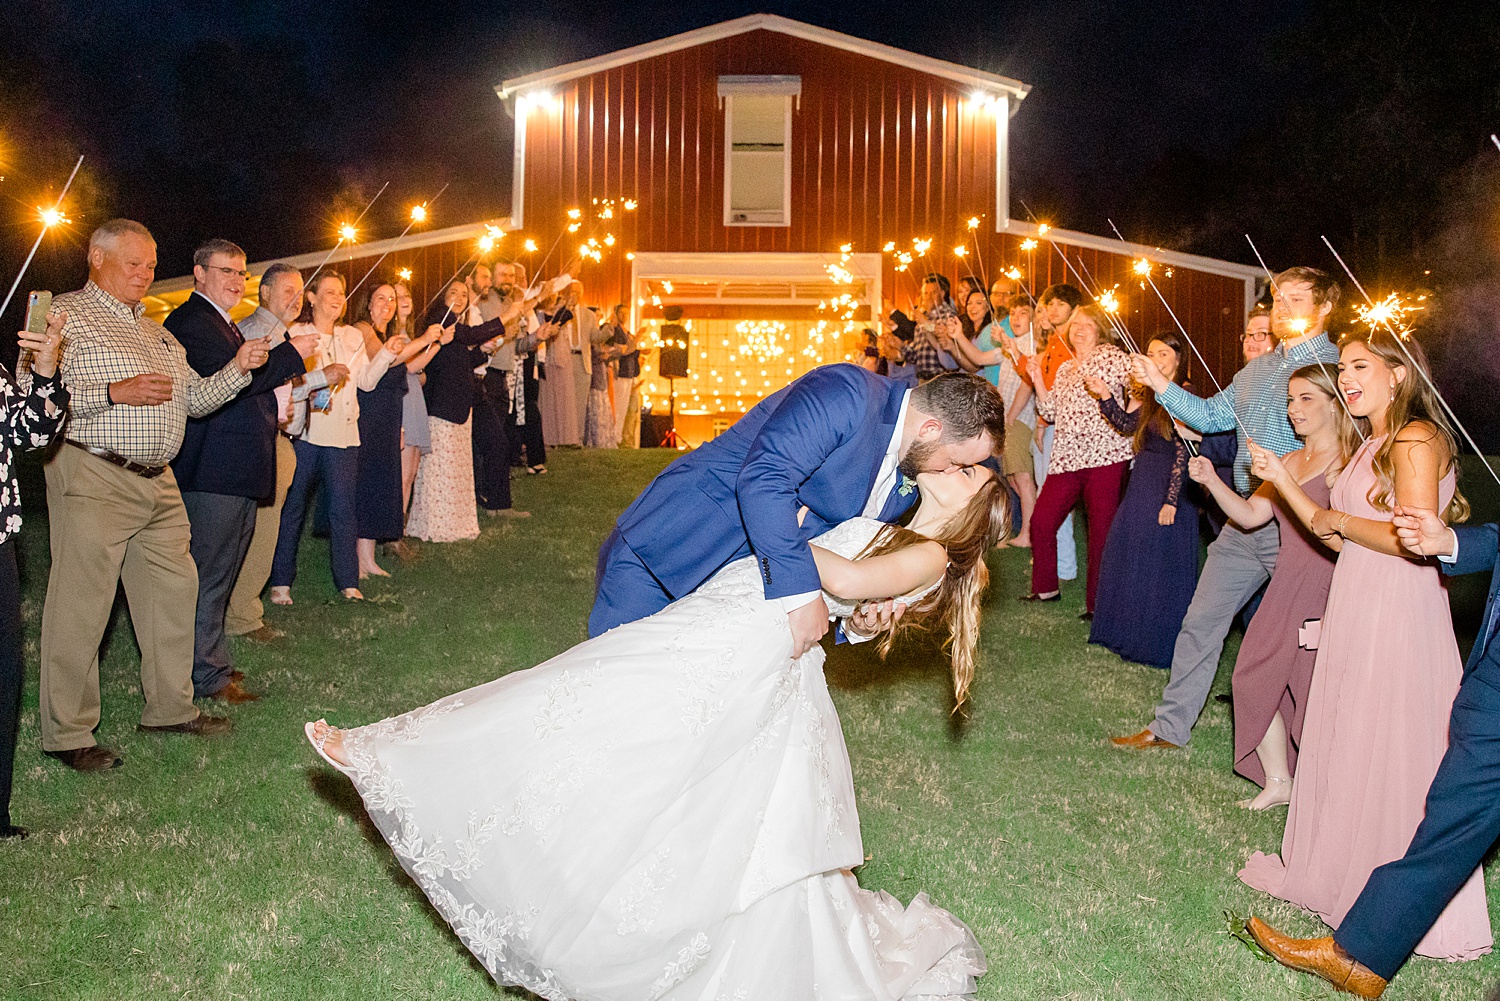 newlyweds have sparkler exit at the end of wedding day